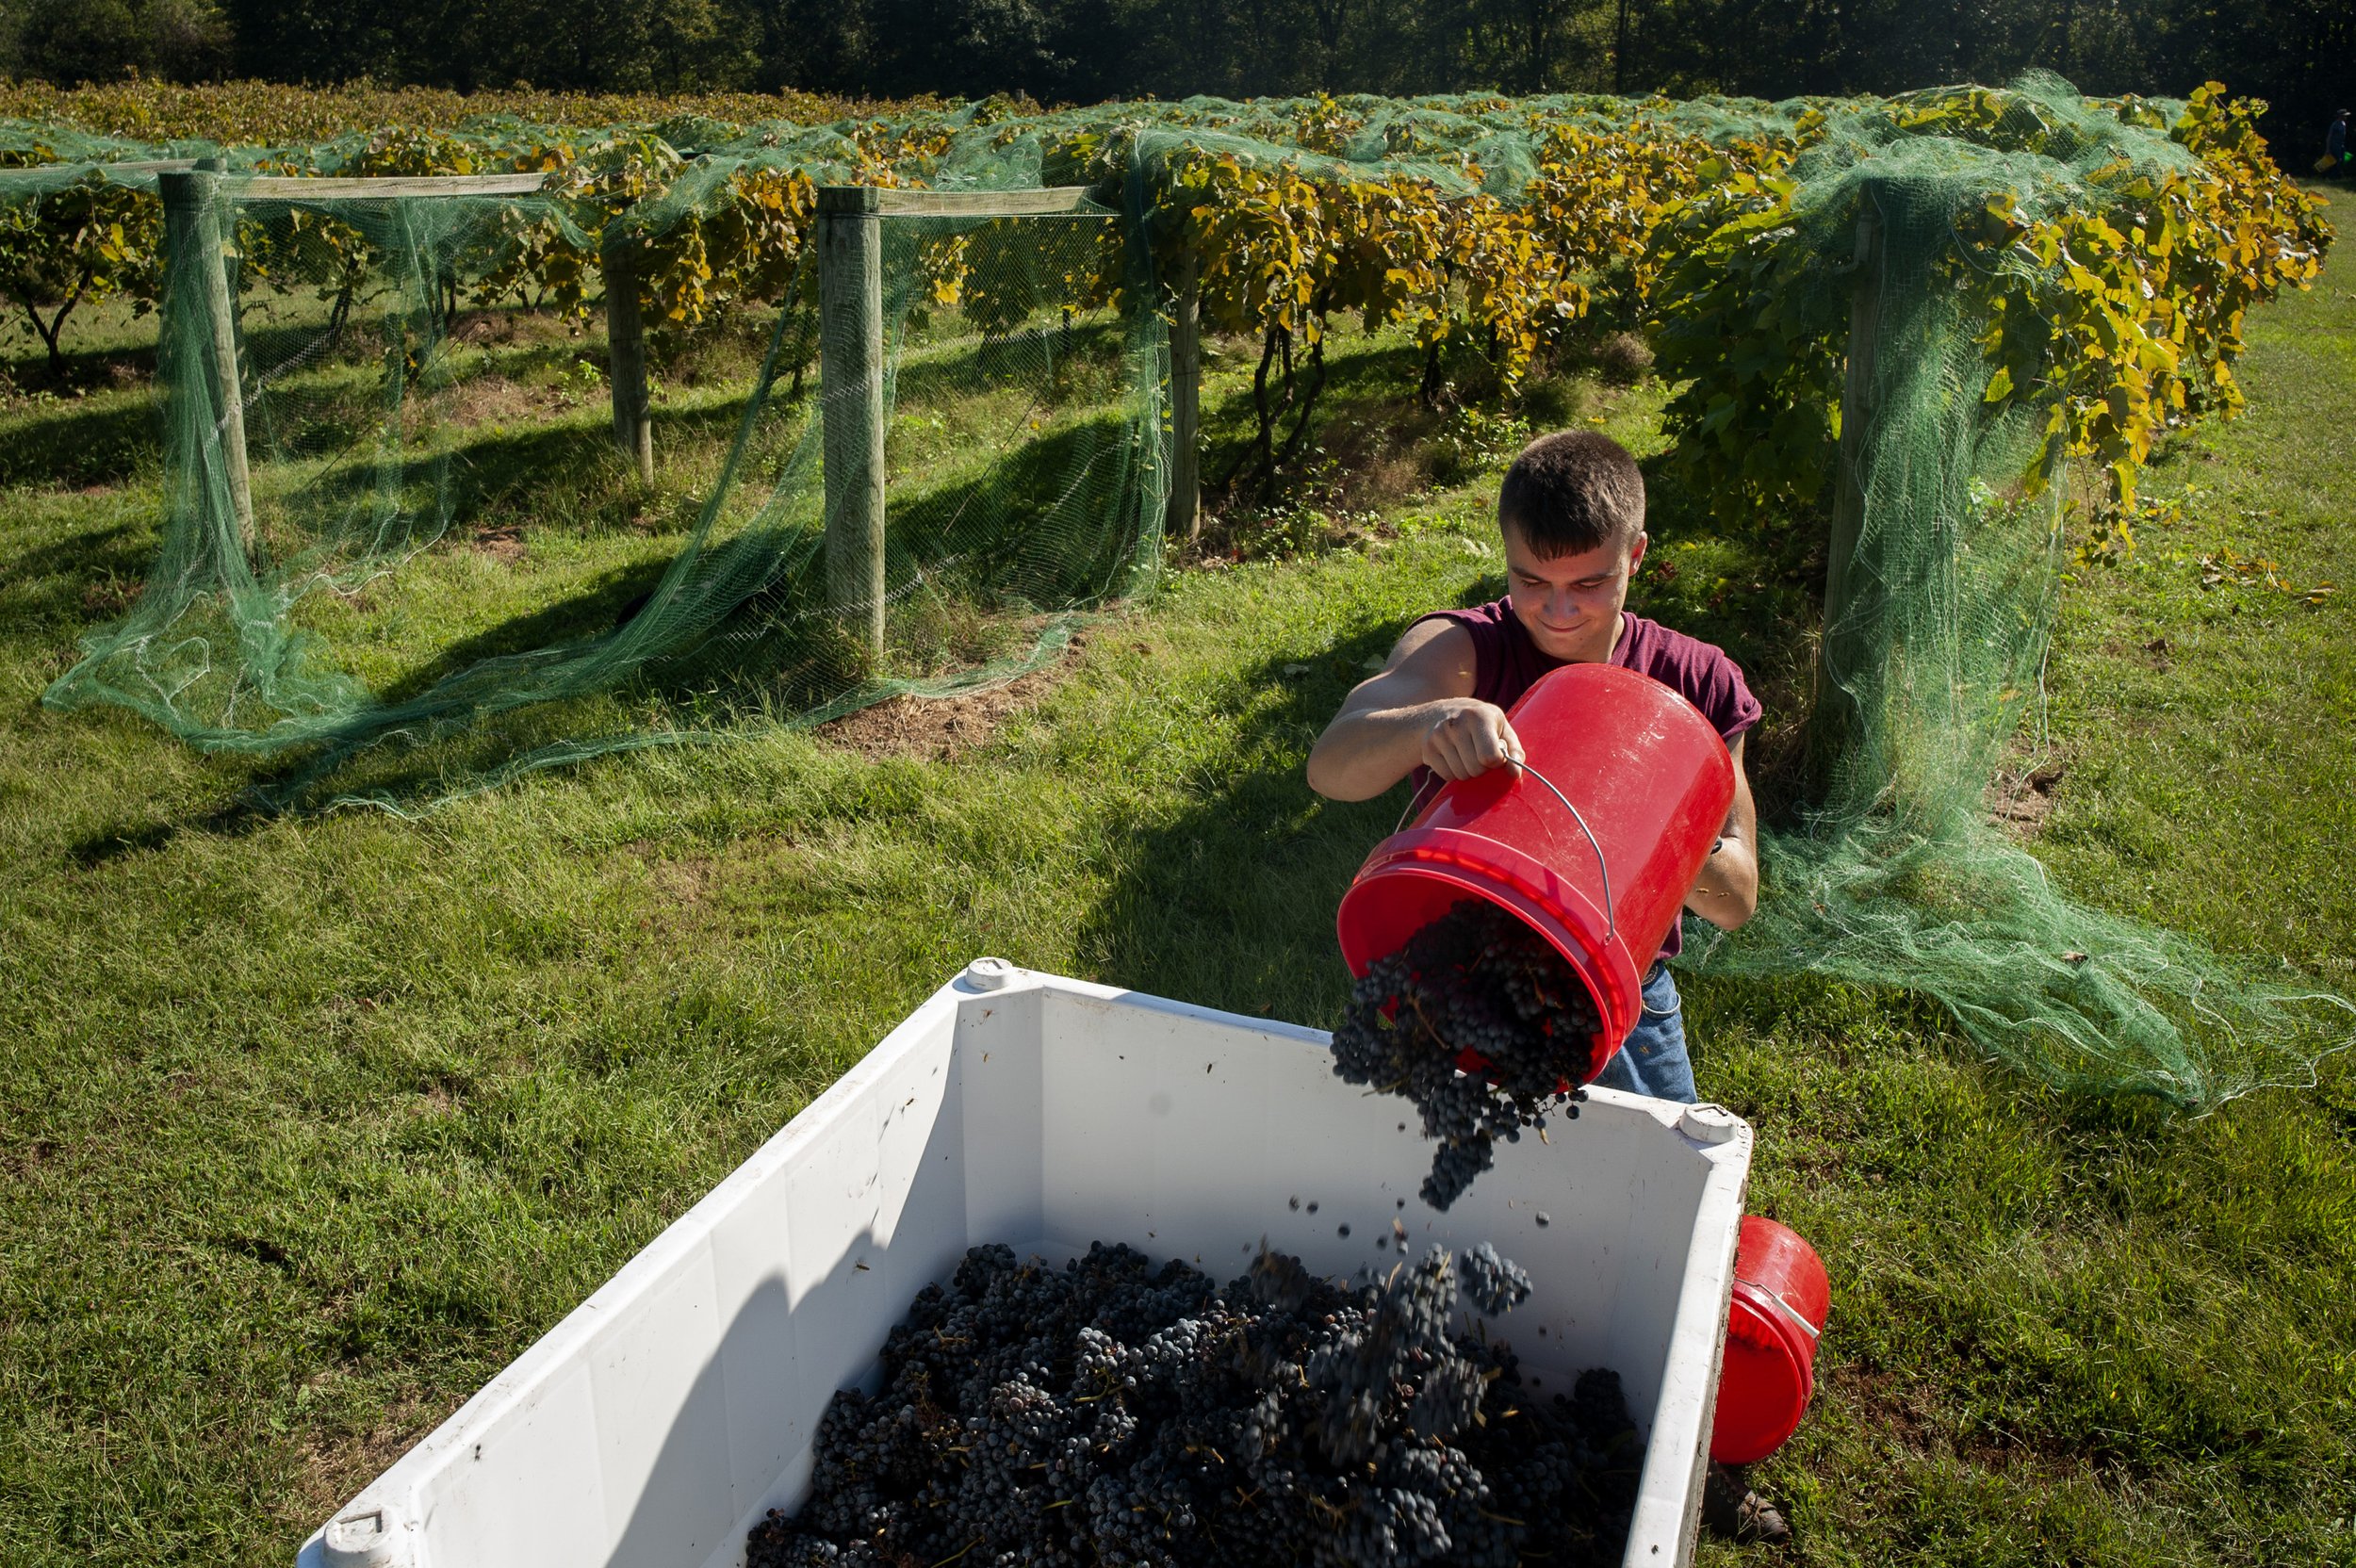  Connor Bullock, 17, son of River Ridge Winery co-owners Denise Bullock and Rob Bullock, puts a load of Norton grapes in a container during picking Oct. 1 in a vineyard of River Ridge Winery in Commerce, Missouri.  “Basically you put your heart and s